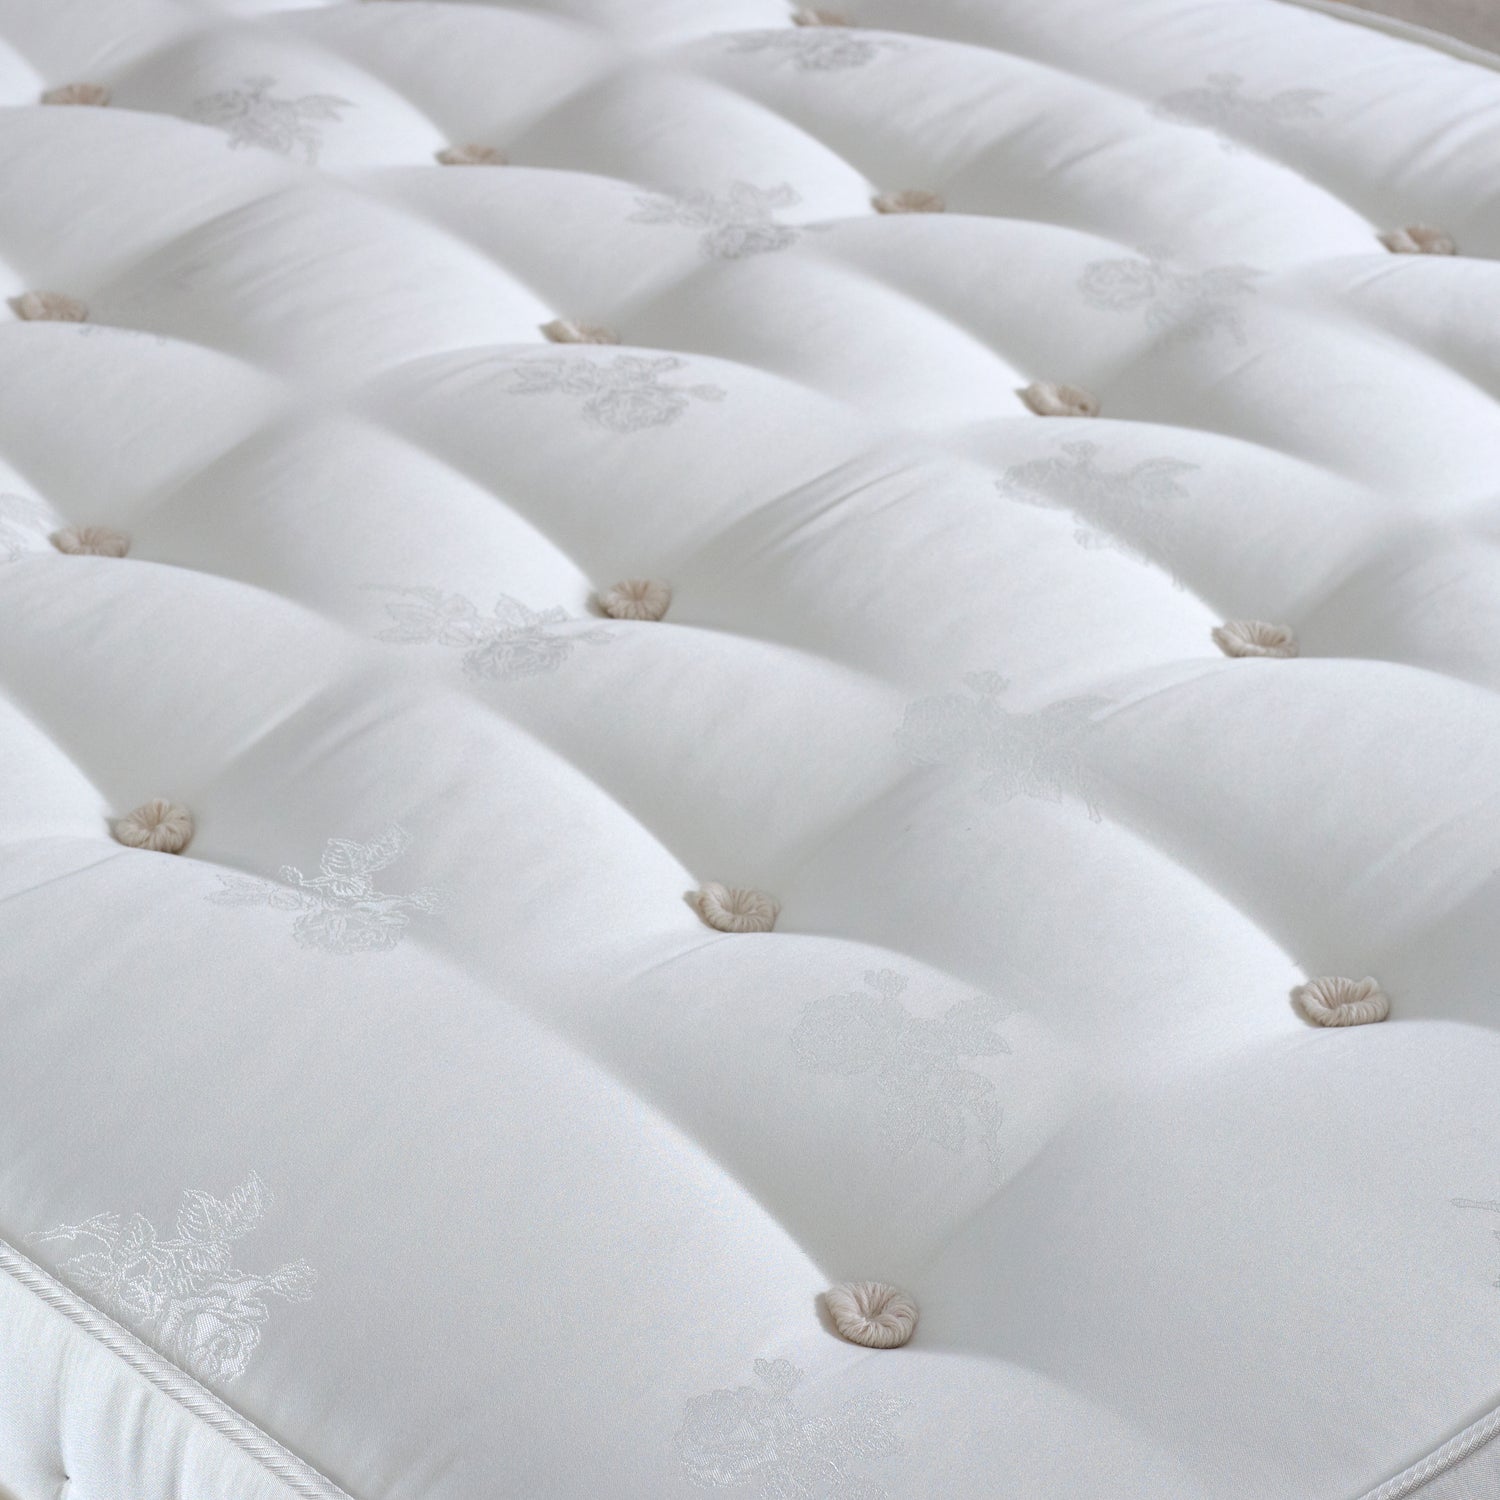 Bedmaster Signature 2000 Platinum Mattress Cover And Tufts Close Up-Better Bed Company 